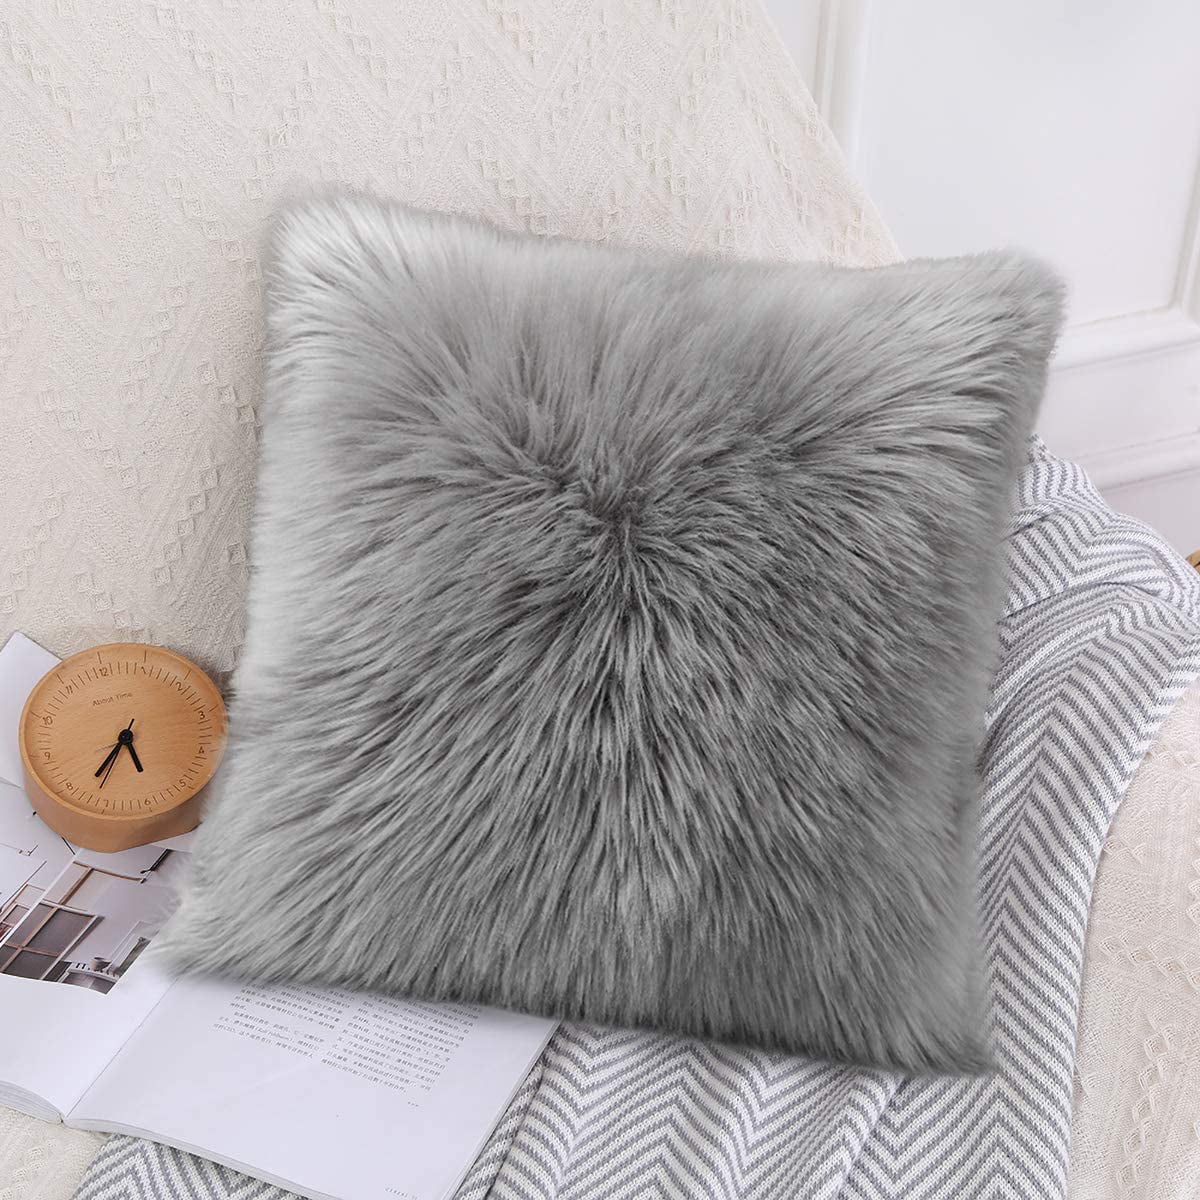 Lochas Modern Chair Decorative Fluffy Pillow Case, Backing Hold Pillow Case/Seat Sofa Cushion Square Throw Pillow Cover, 18 x 18inch Gray, Size